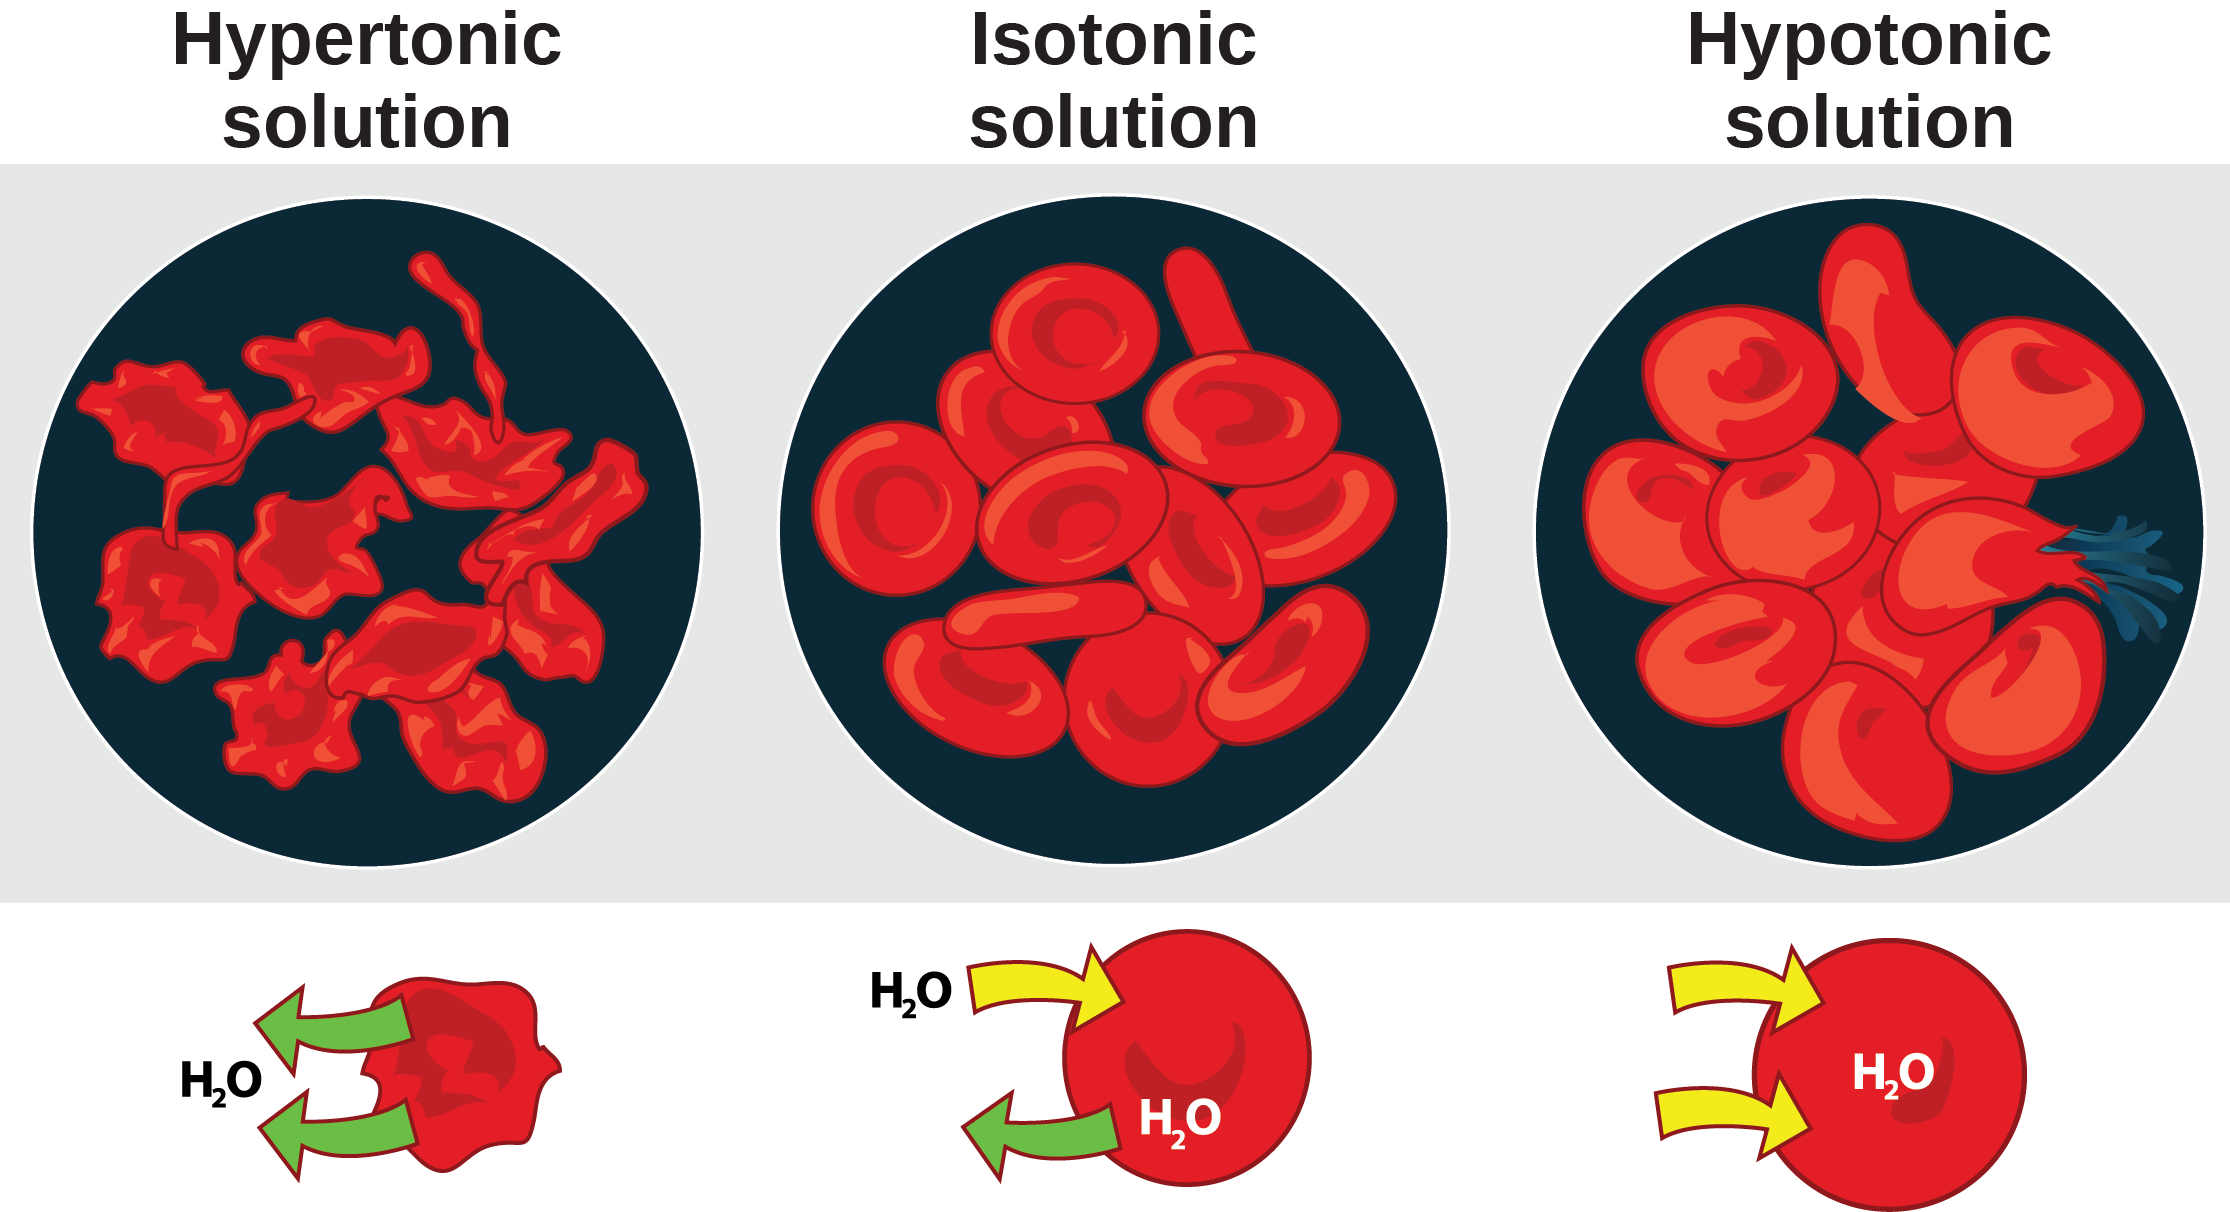 The left part of this illustration shows shriveled red blood cells bathed in a hypertonic solution. Below this, an diagram shows that upper case H subscript 2 baseline upper case O is leaving the red blood cell. The middle part shows healthy red blood cells bathed in an isotonic solution.  A diagram below this shows upper H subscript 2 baseline upper O both entering and exiting the cell.  And the right part shows bloated red blood cells bathed in a hypotonic solution. One of the bloated cells in the hypotonic solution bursts. A diagram below this shows upper H subscript 2 baseline upper O enterning the cell.